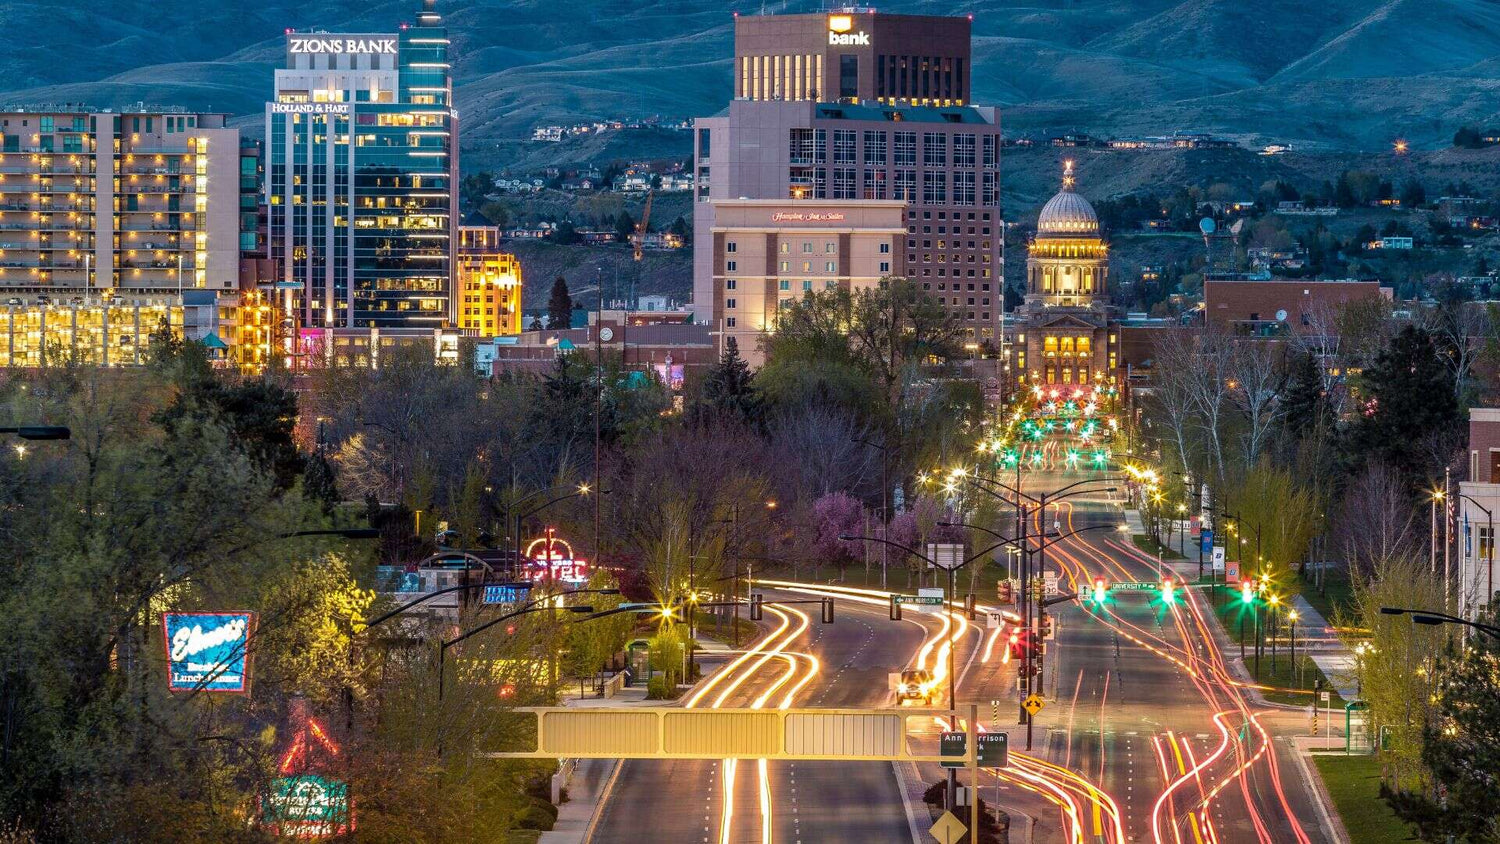 Urban streets of Boise at night time. - History By Mail